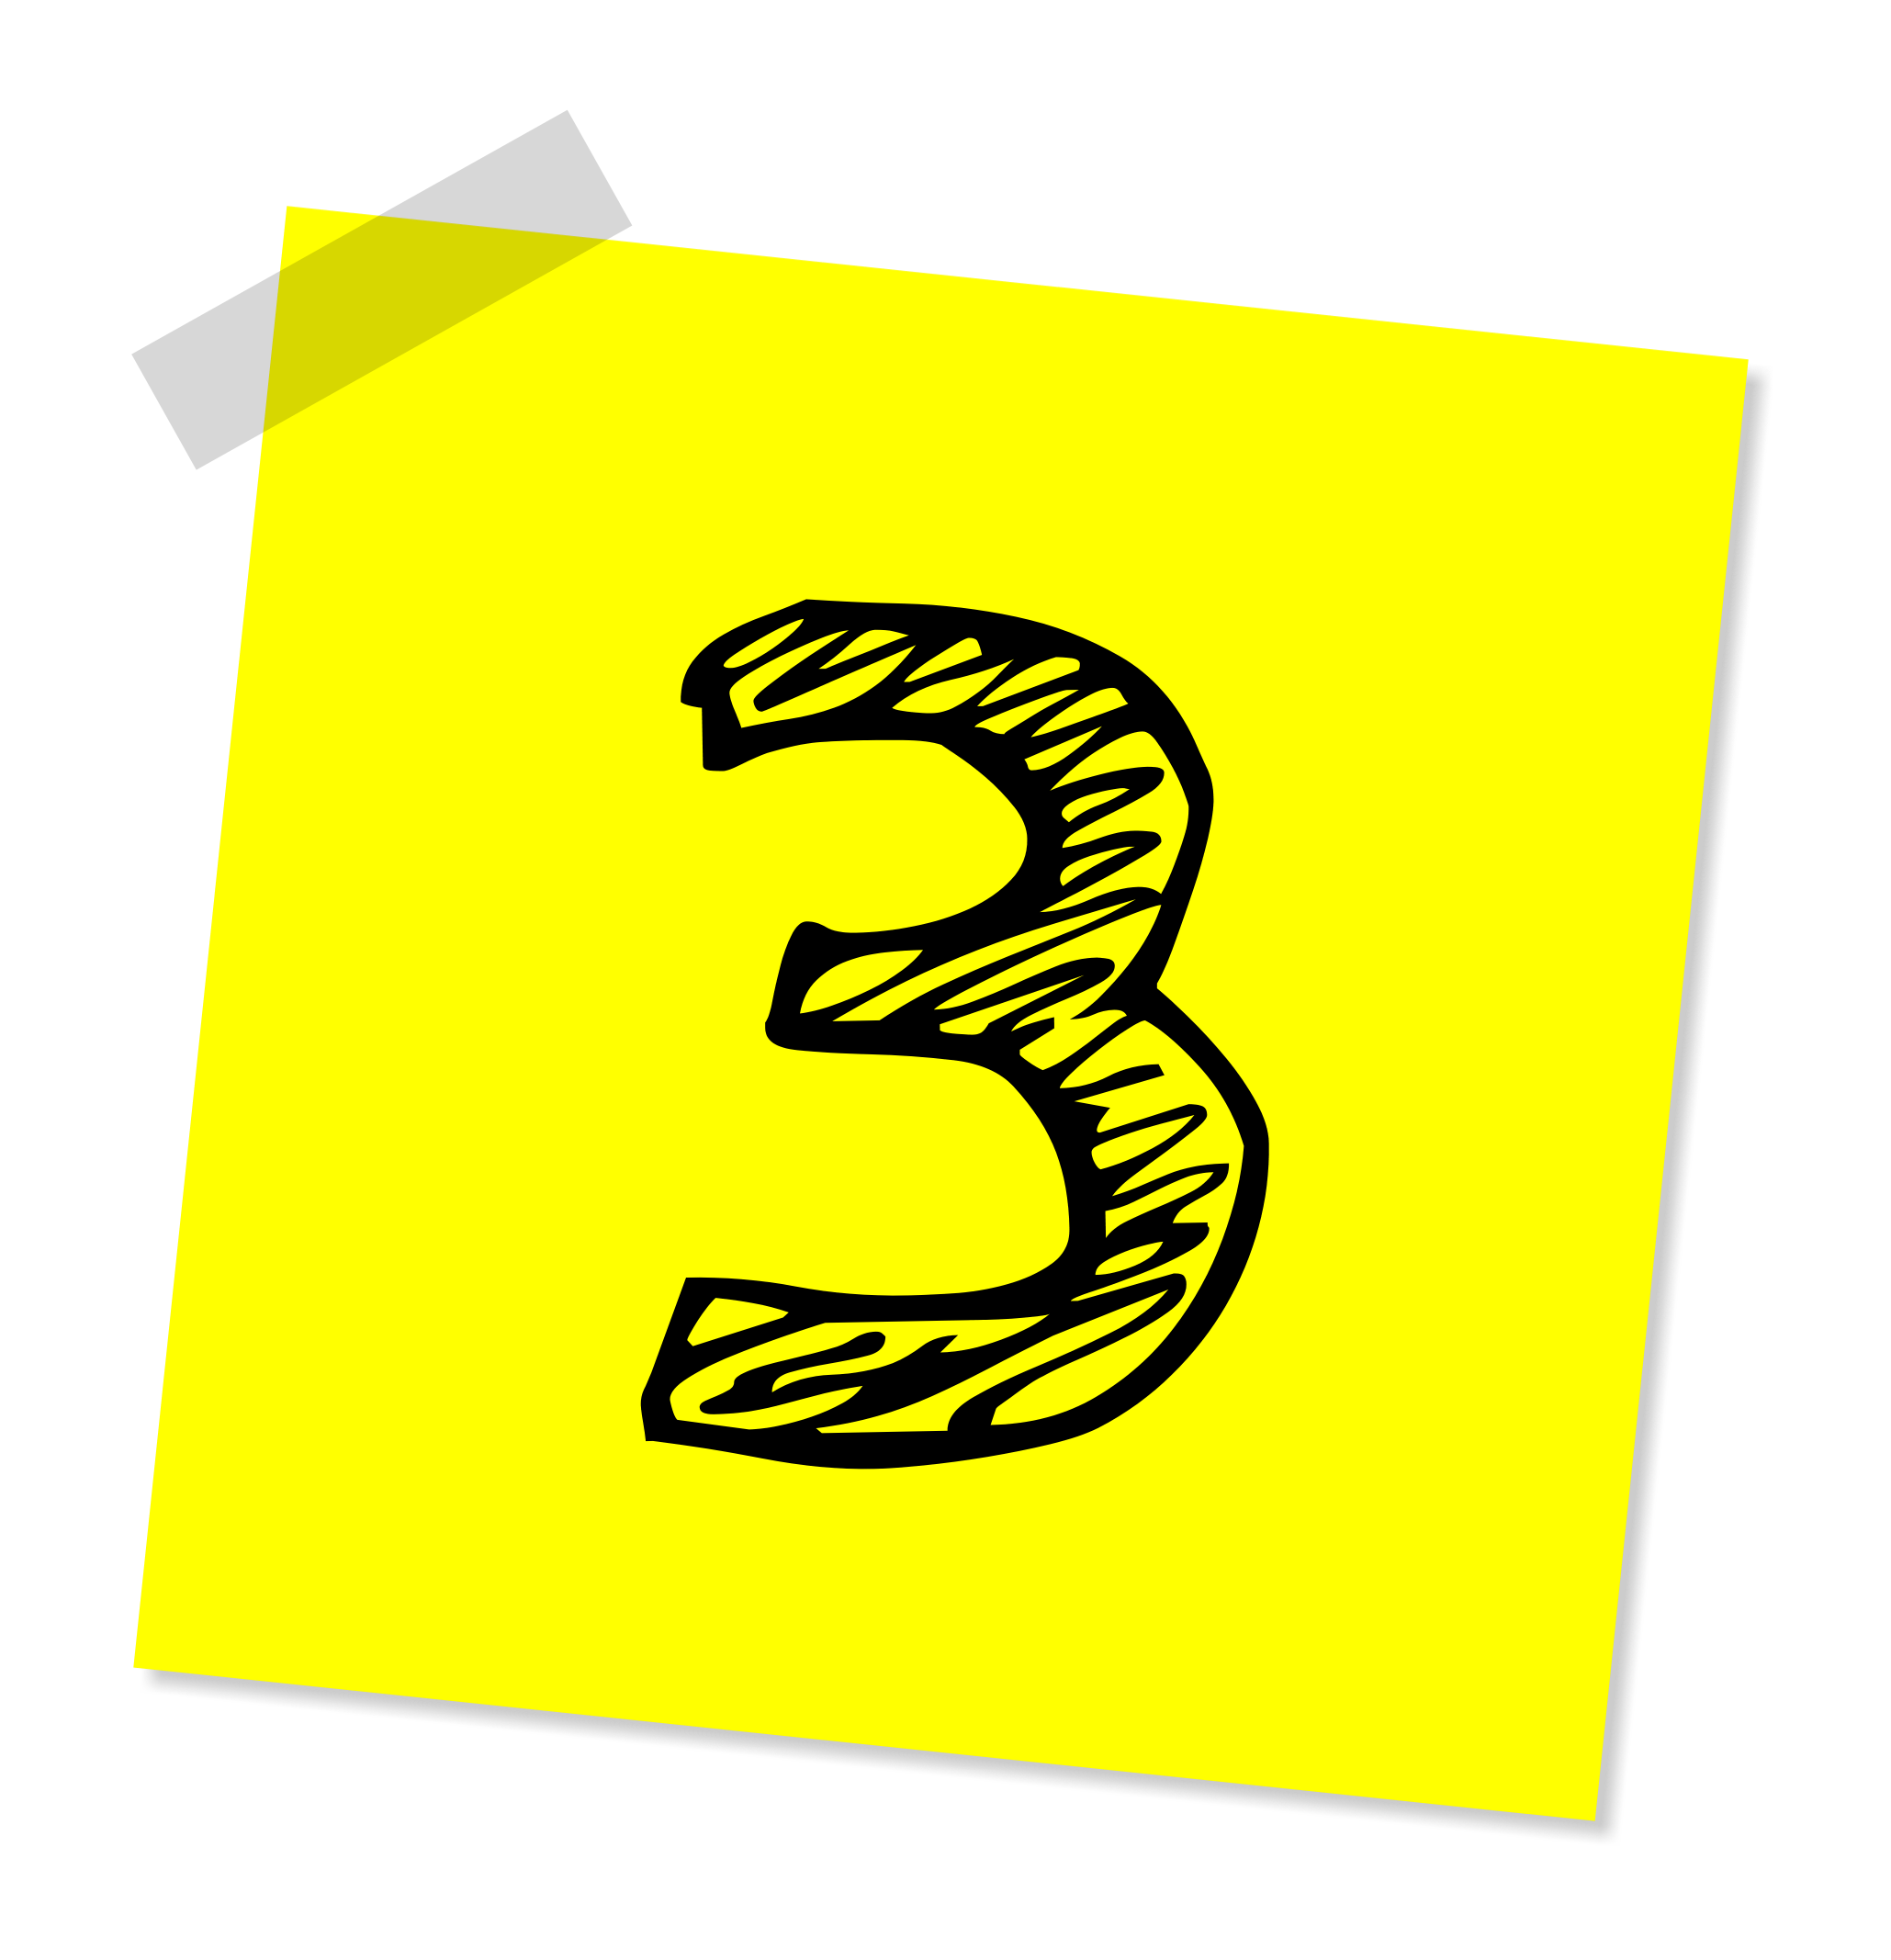 Three 3 number as a drawing free image download